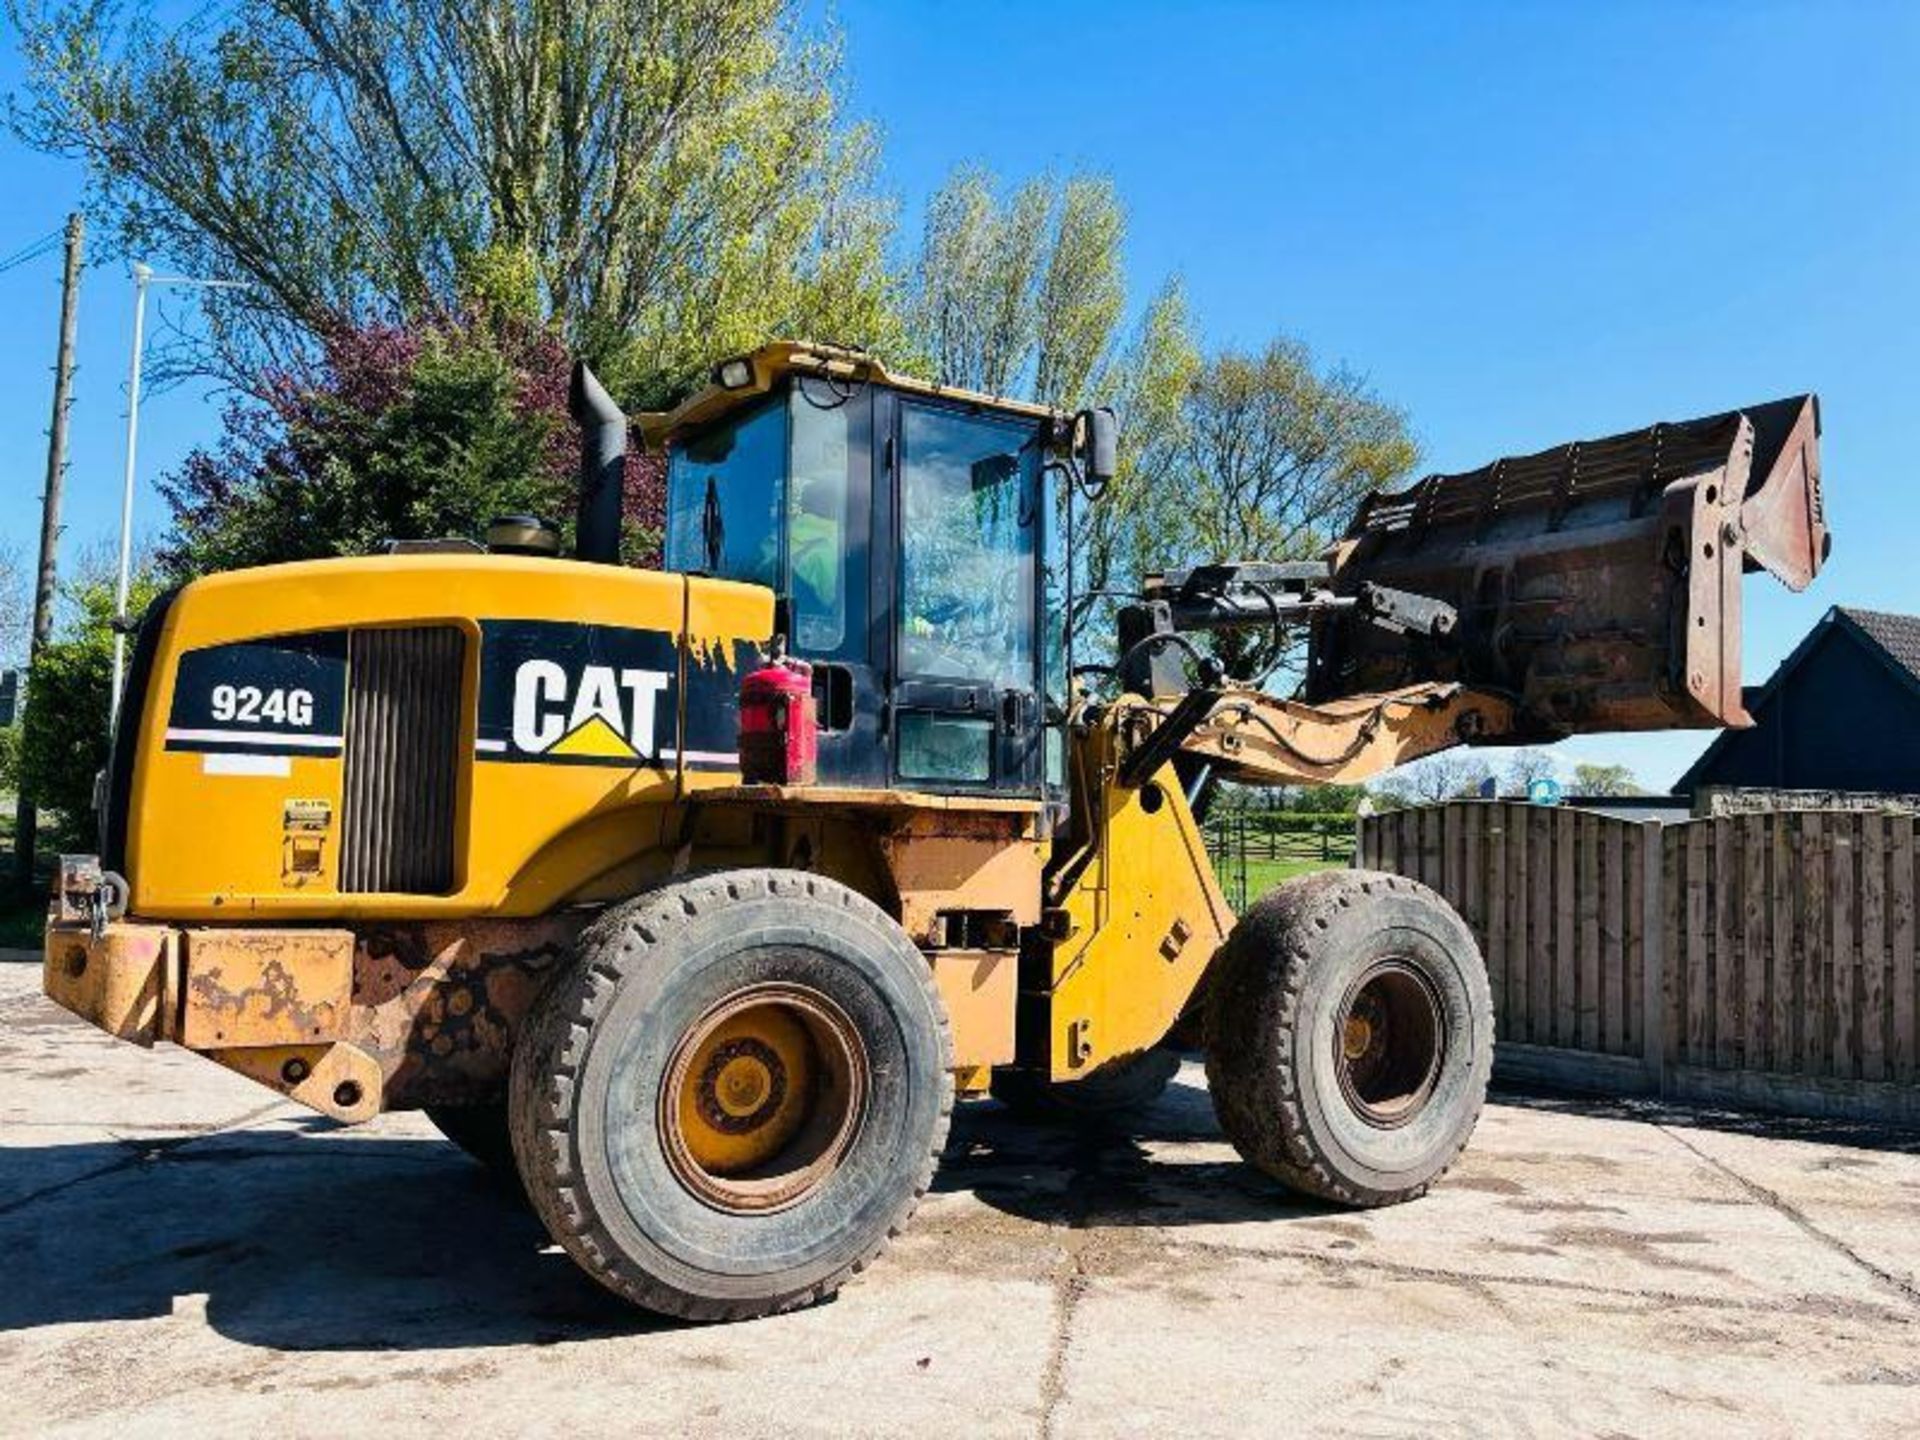 CATERPILLAR 924G 4WD LOADING SHOVEL C/W FOUR IN ONE BUCKET  - Image 3 of 18